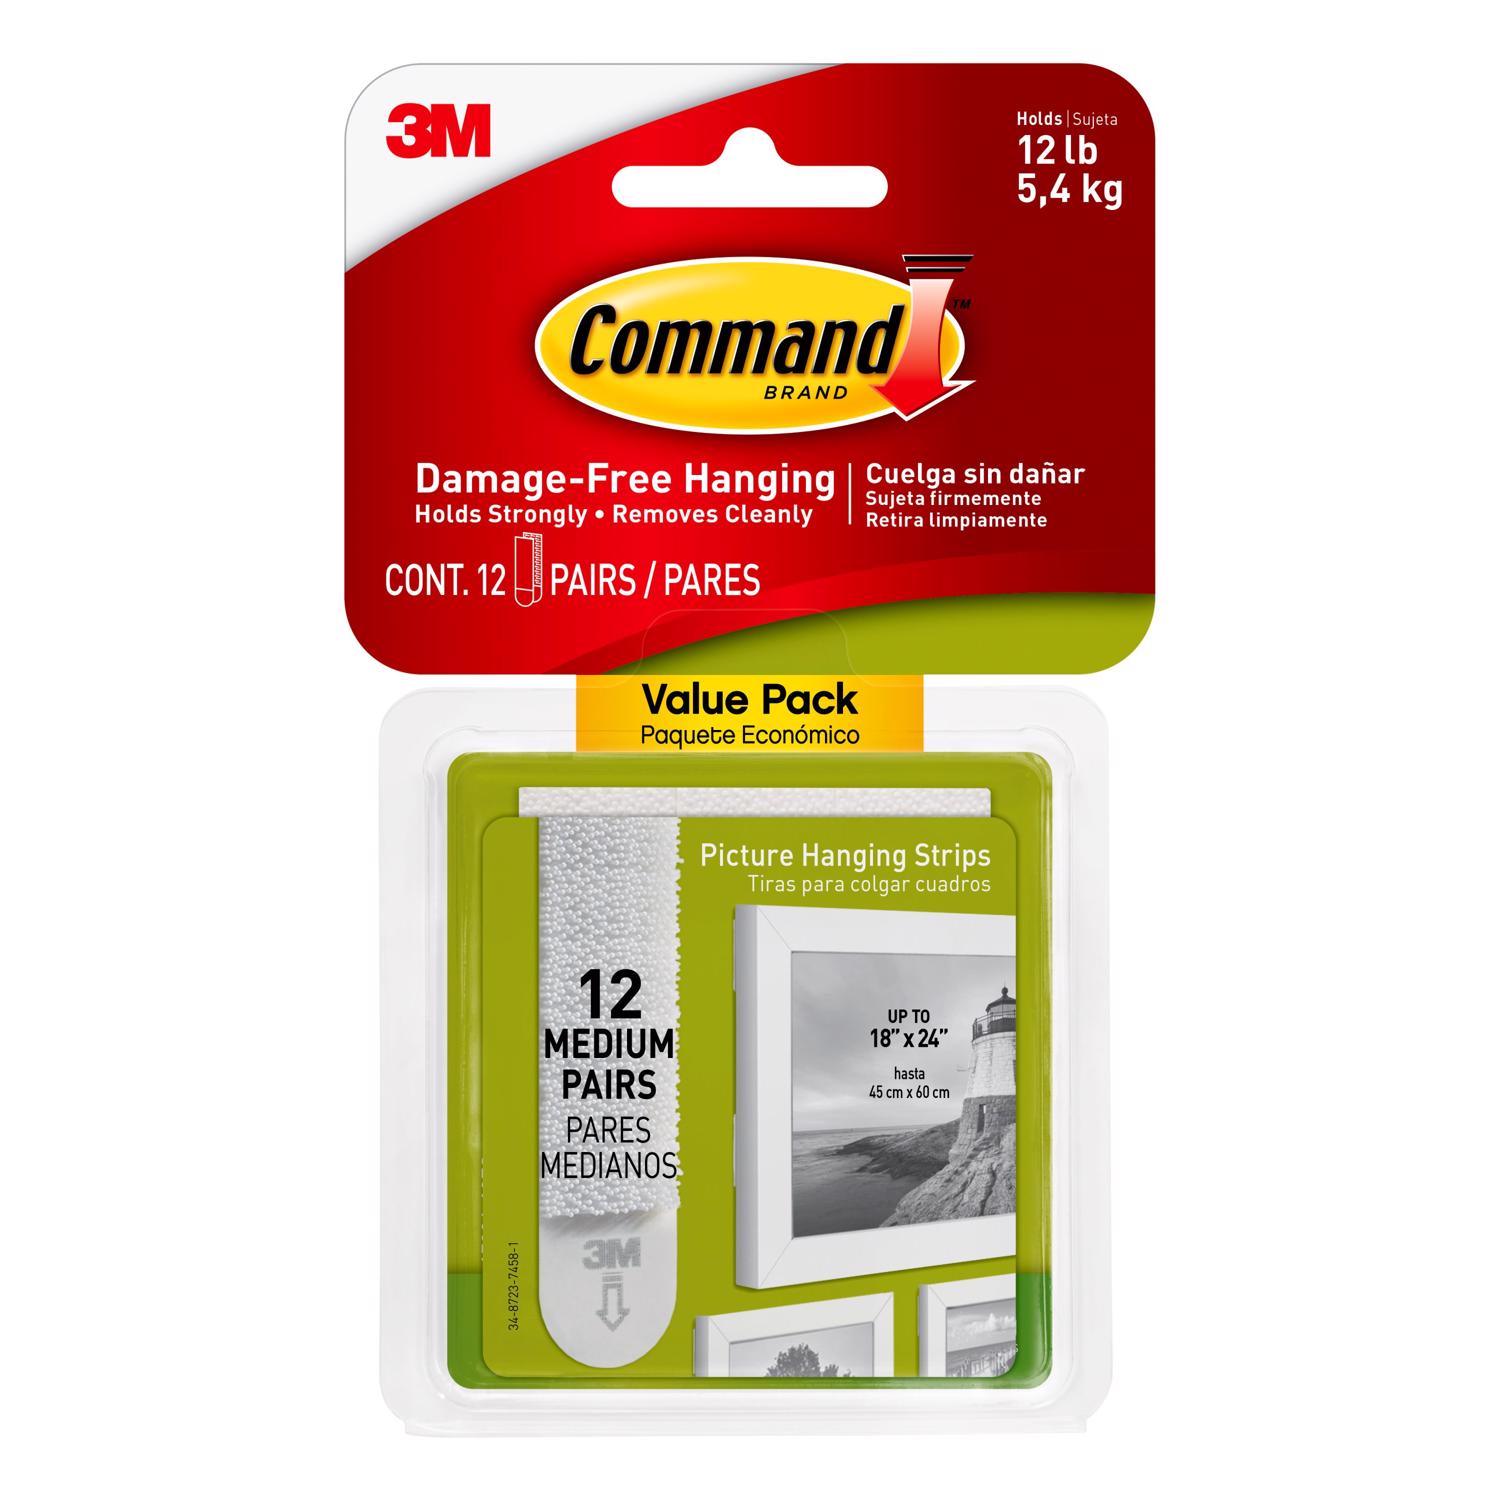 3M Command Black Large Picture Hanging Strips 16 lb 4 pk - Ace Hardware